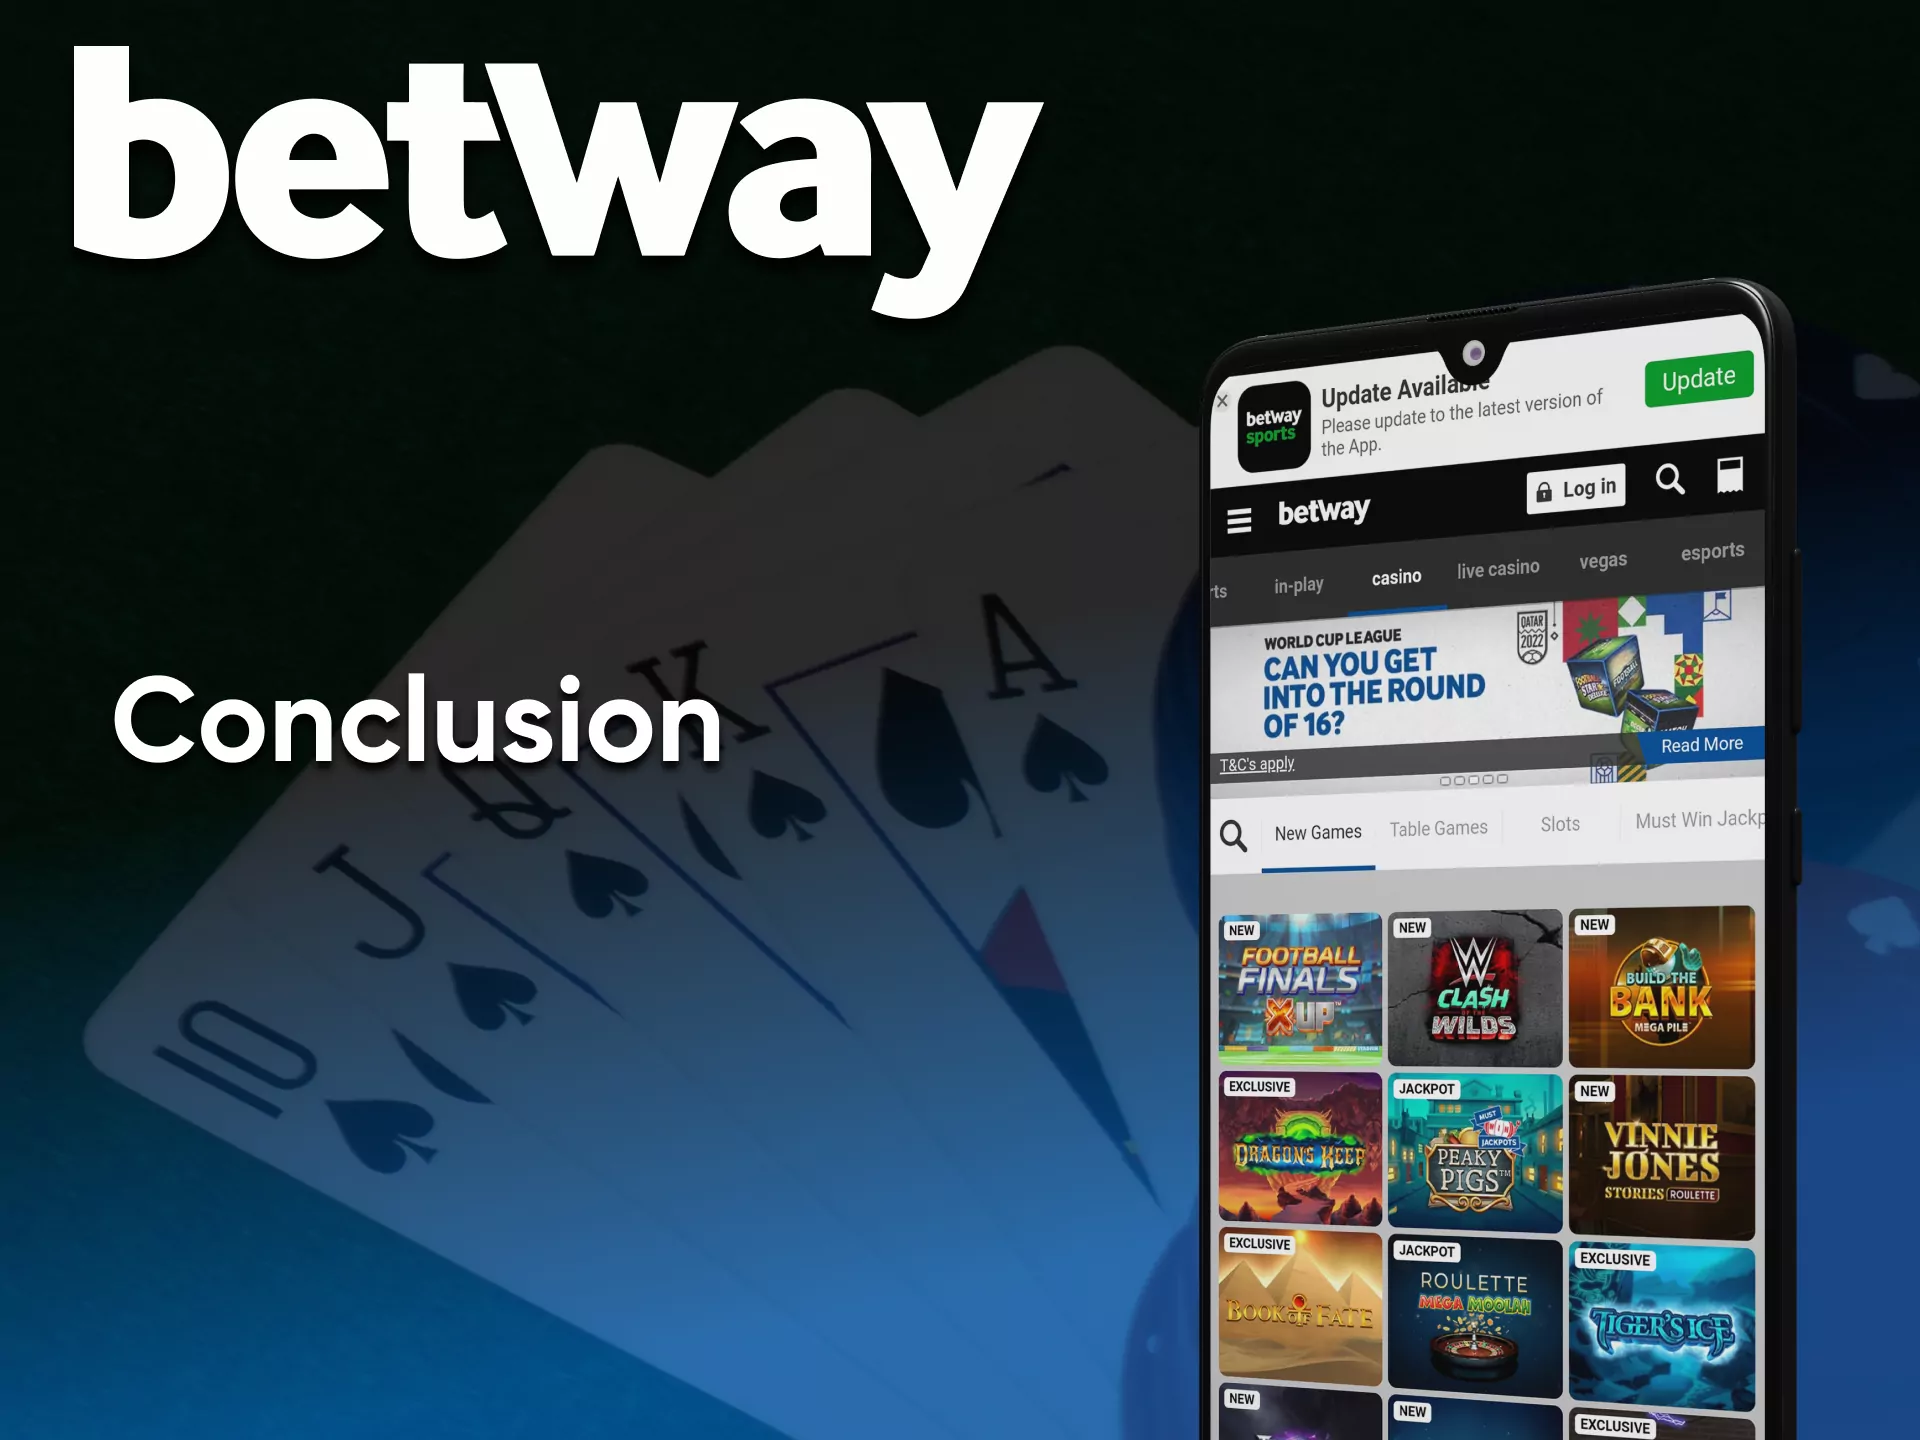 The Betway is the better choice for casino games.